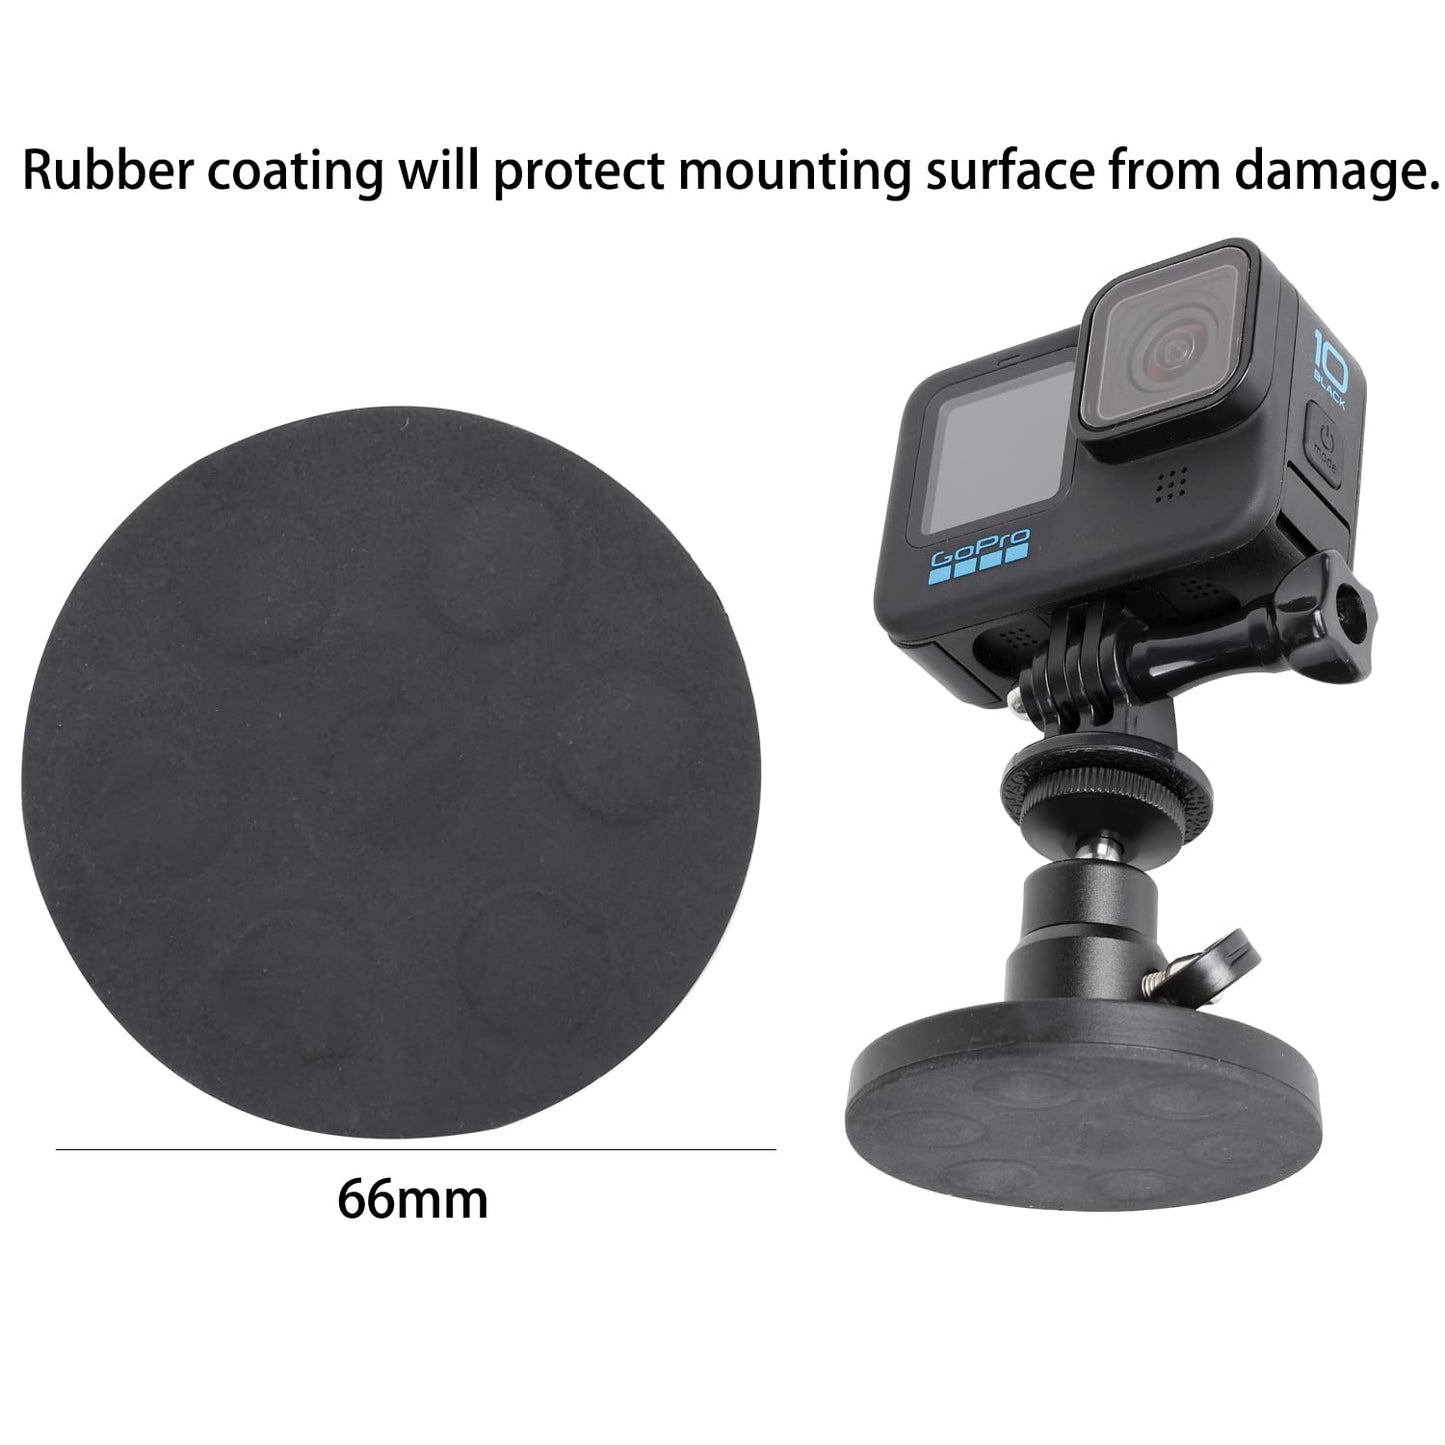 PellKing Magnet Camera Mount for GoPro Insta360 Akaso DJI Action,with Rotation Ball Head Super Strong Rubber Coating Neodymium Magnet for Car, Attaches to Steel or Other Magnetic Surfaces